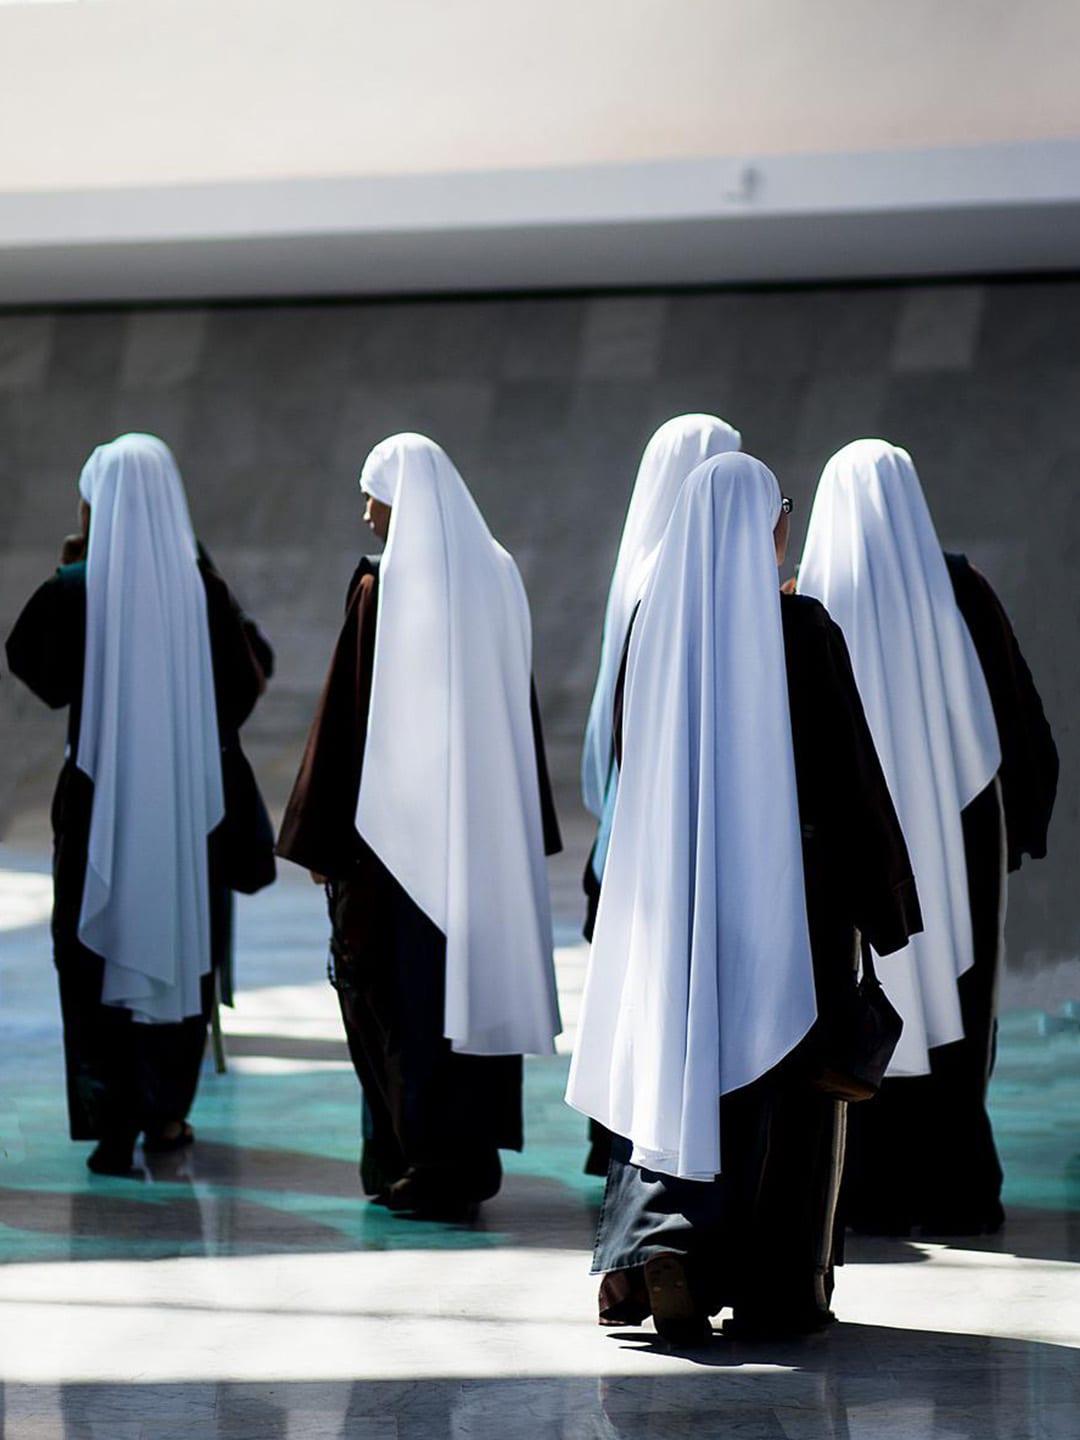 Nuns walking in a group